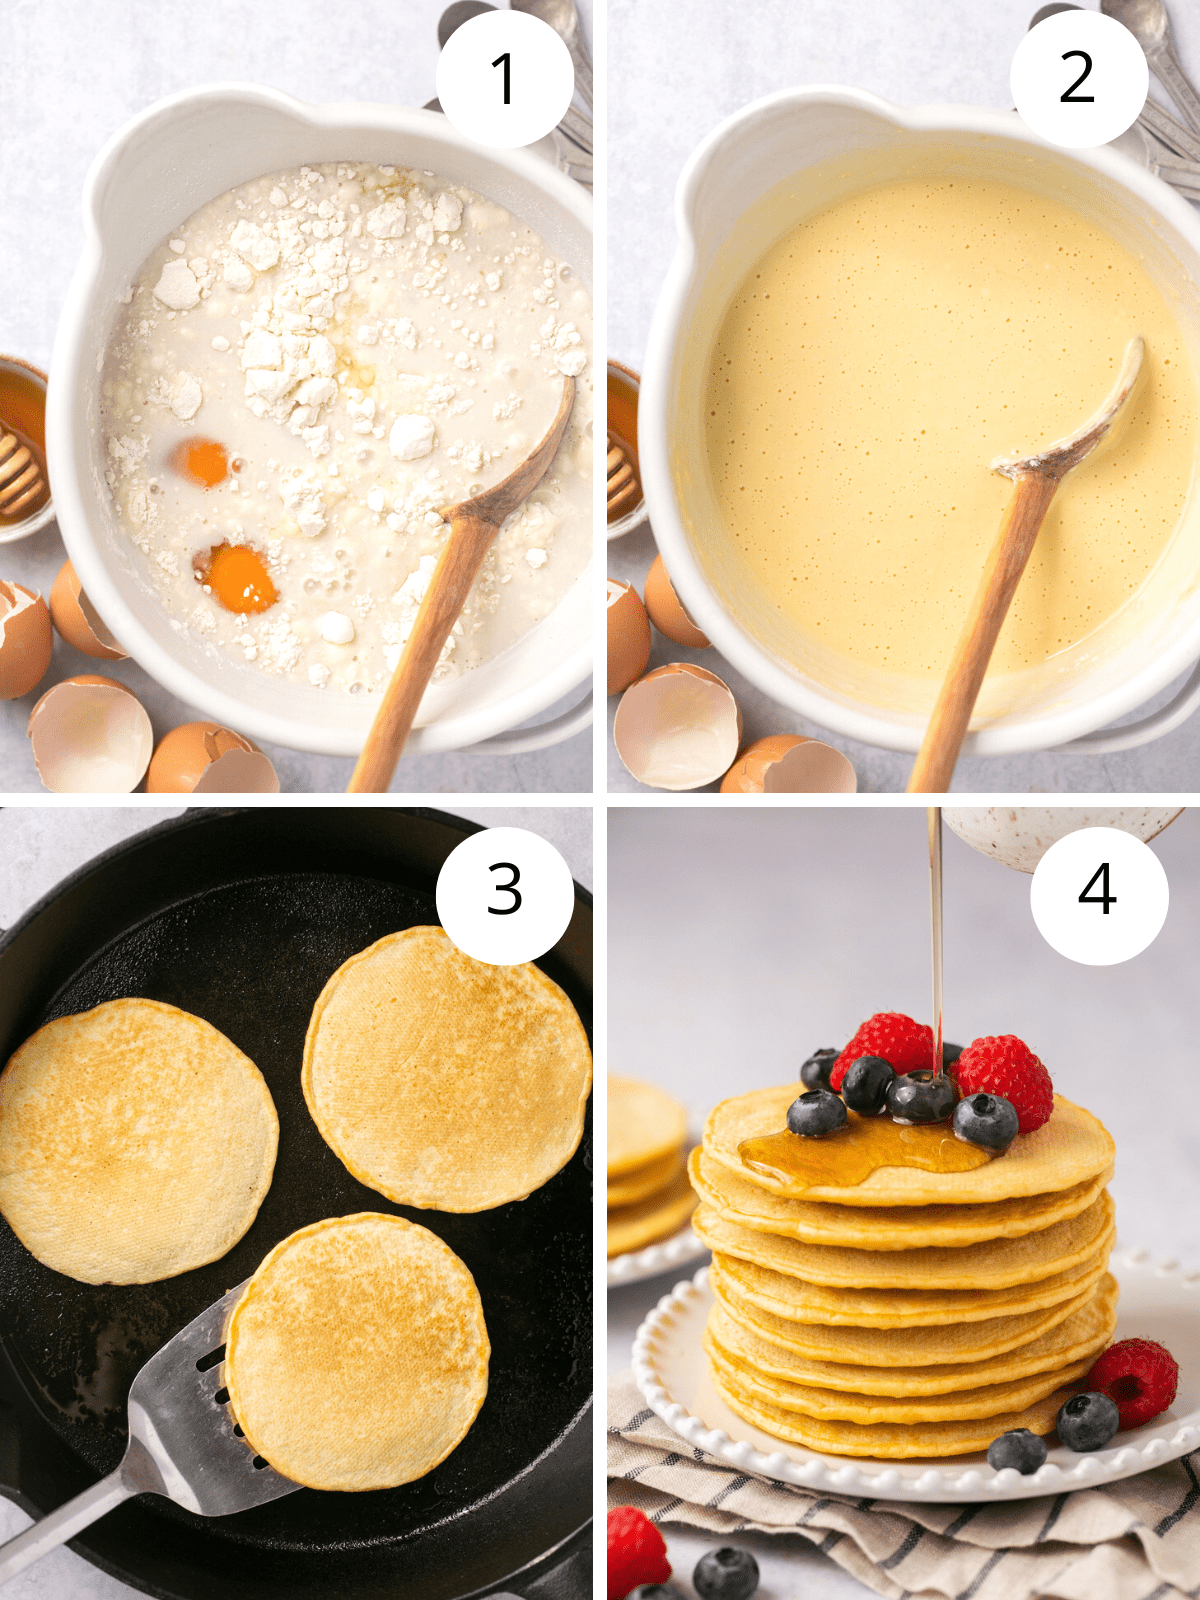 Directions for making oat milk pancakes